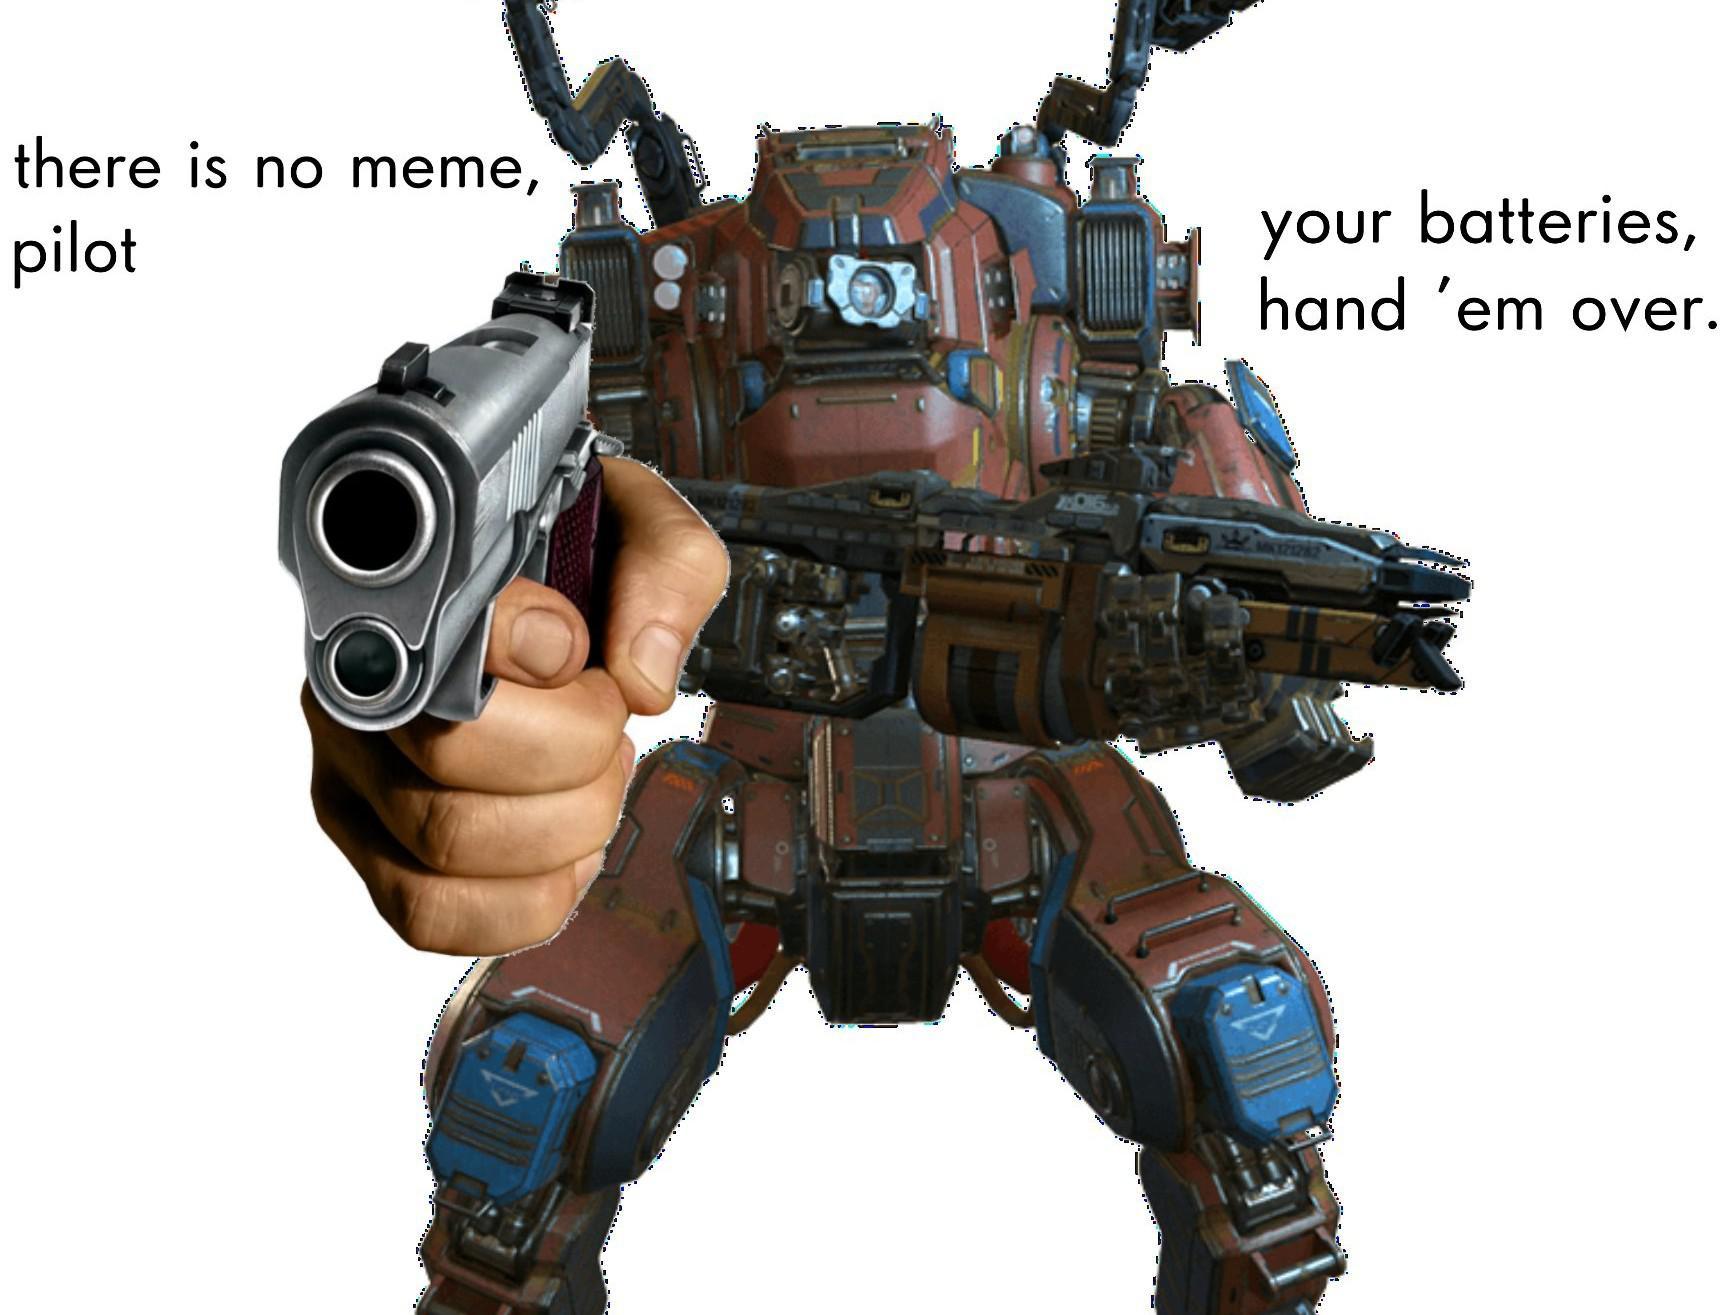 titanfall 2 players when someone has a battery - meme